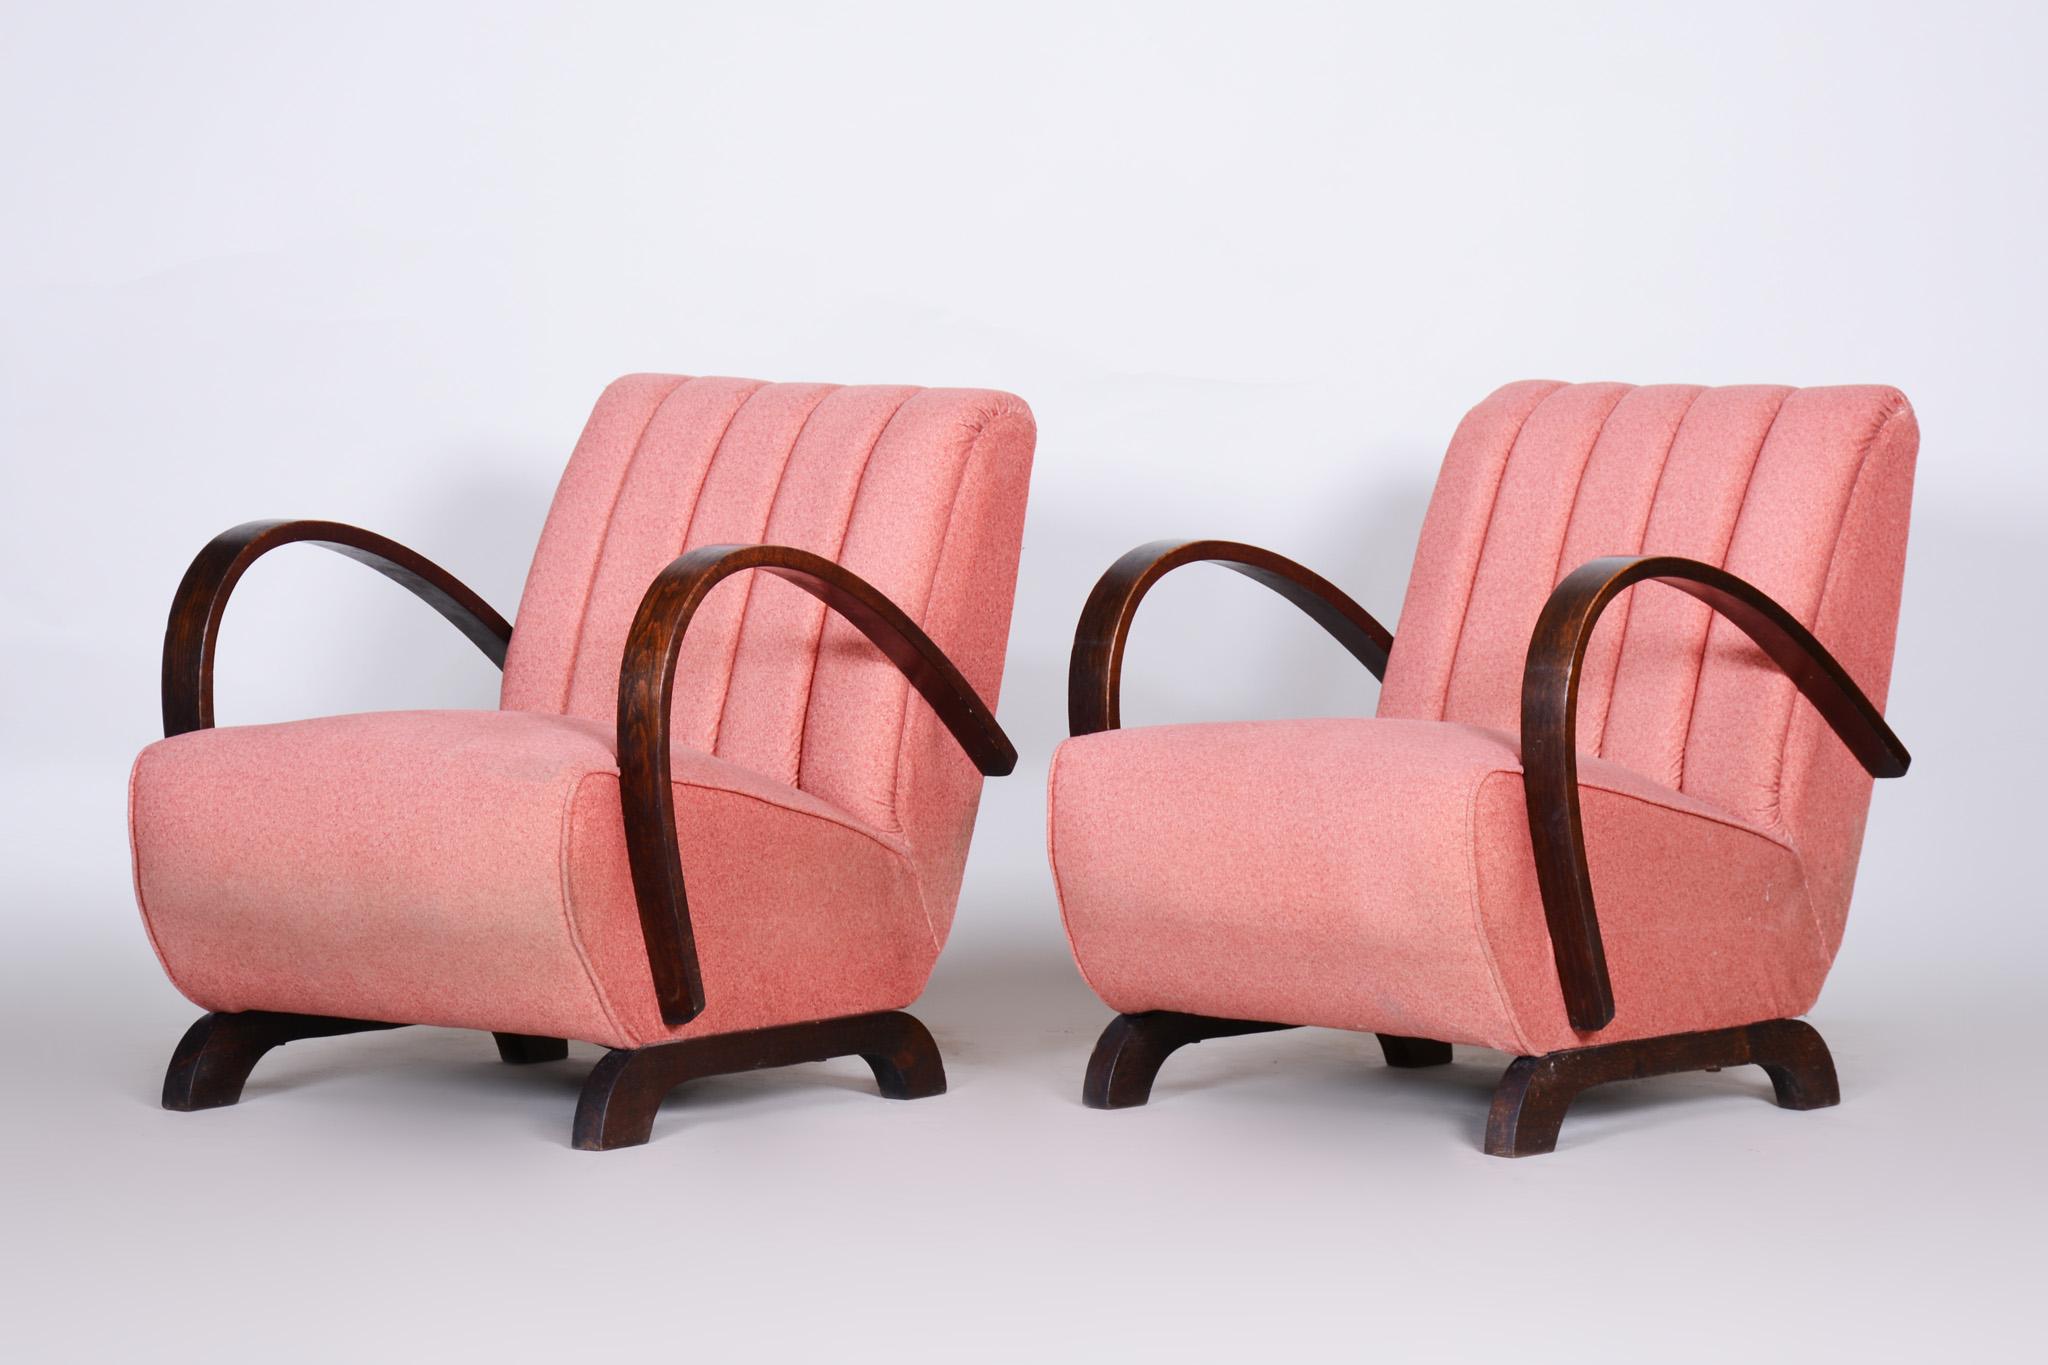 Pink Fabric Armchair Made in Czechia, 1930s, Original Condition, Art Deco Style For Sale 2